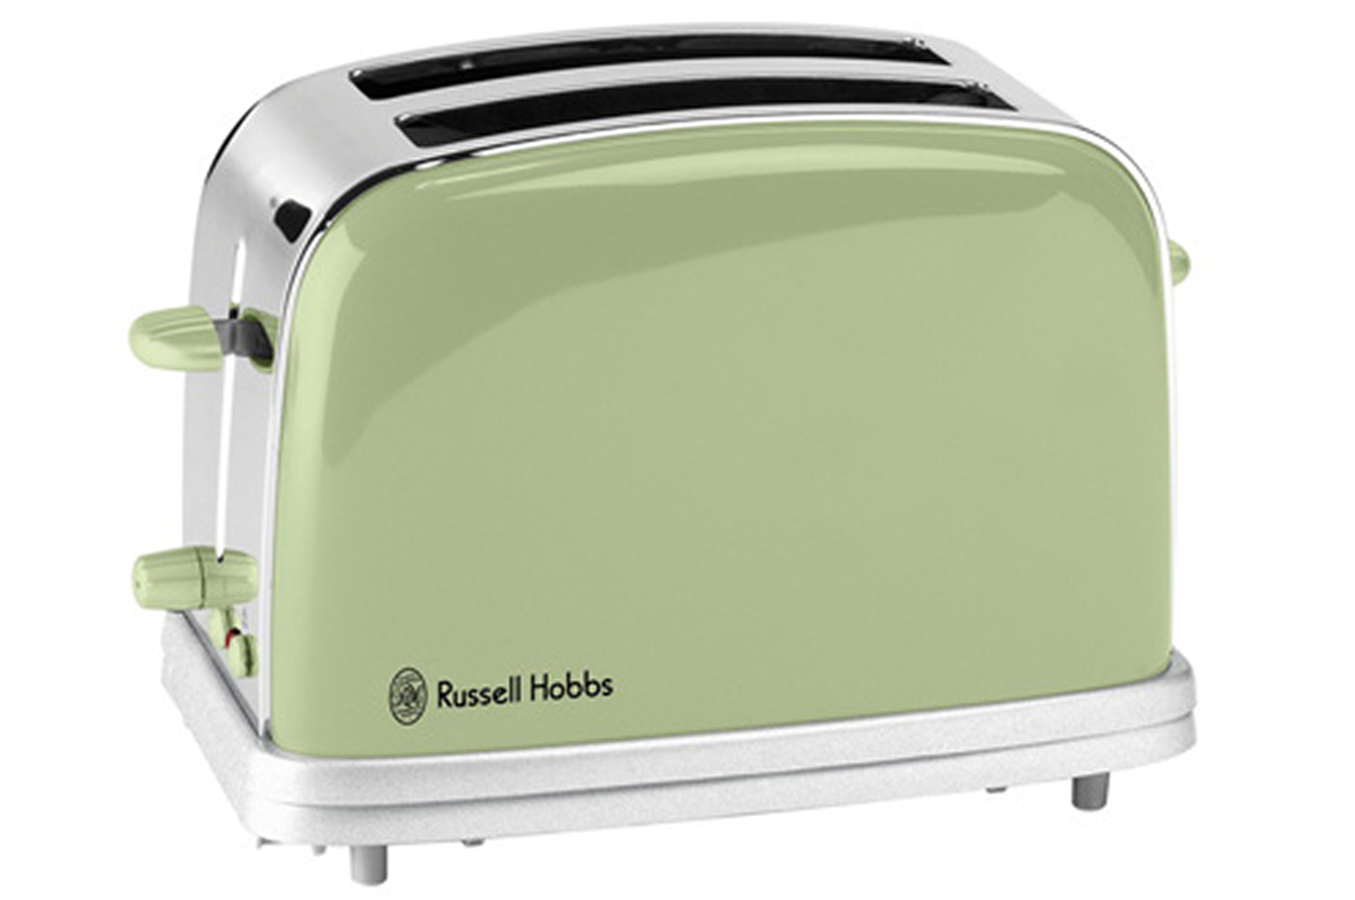 Grille pain Russell Hobbs 18011 56 TOASTER AMANDE 18011 56